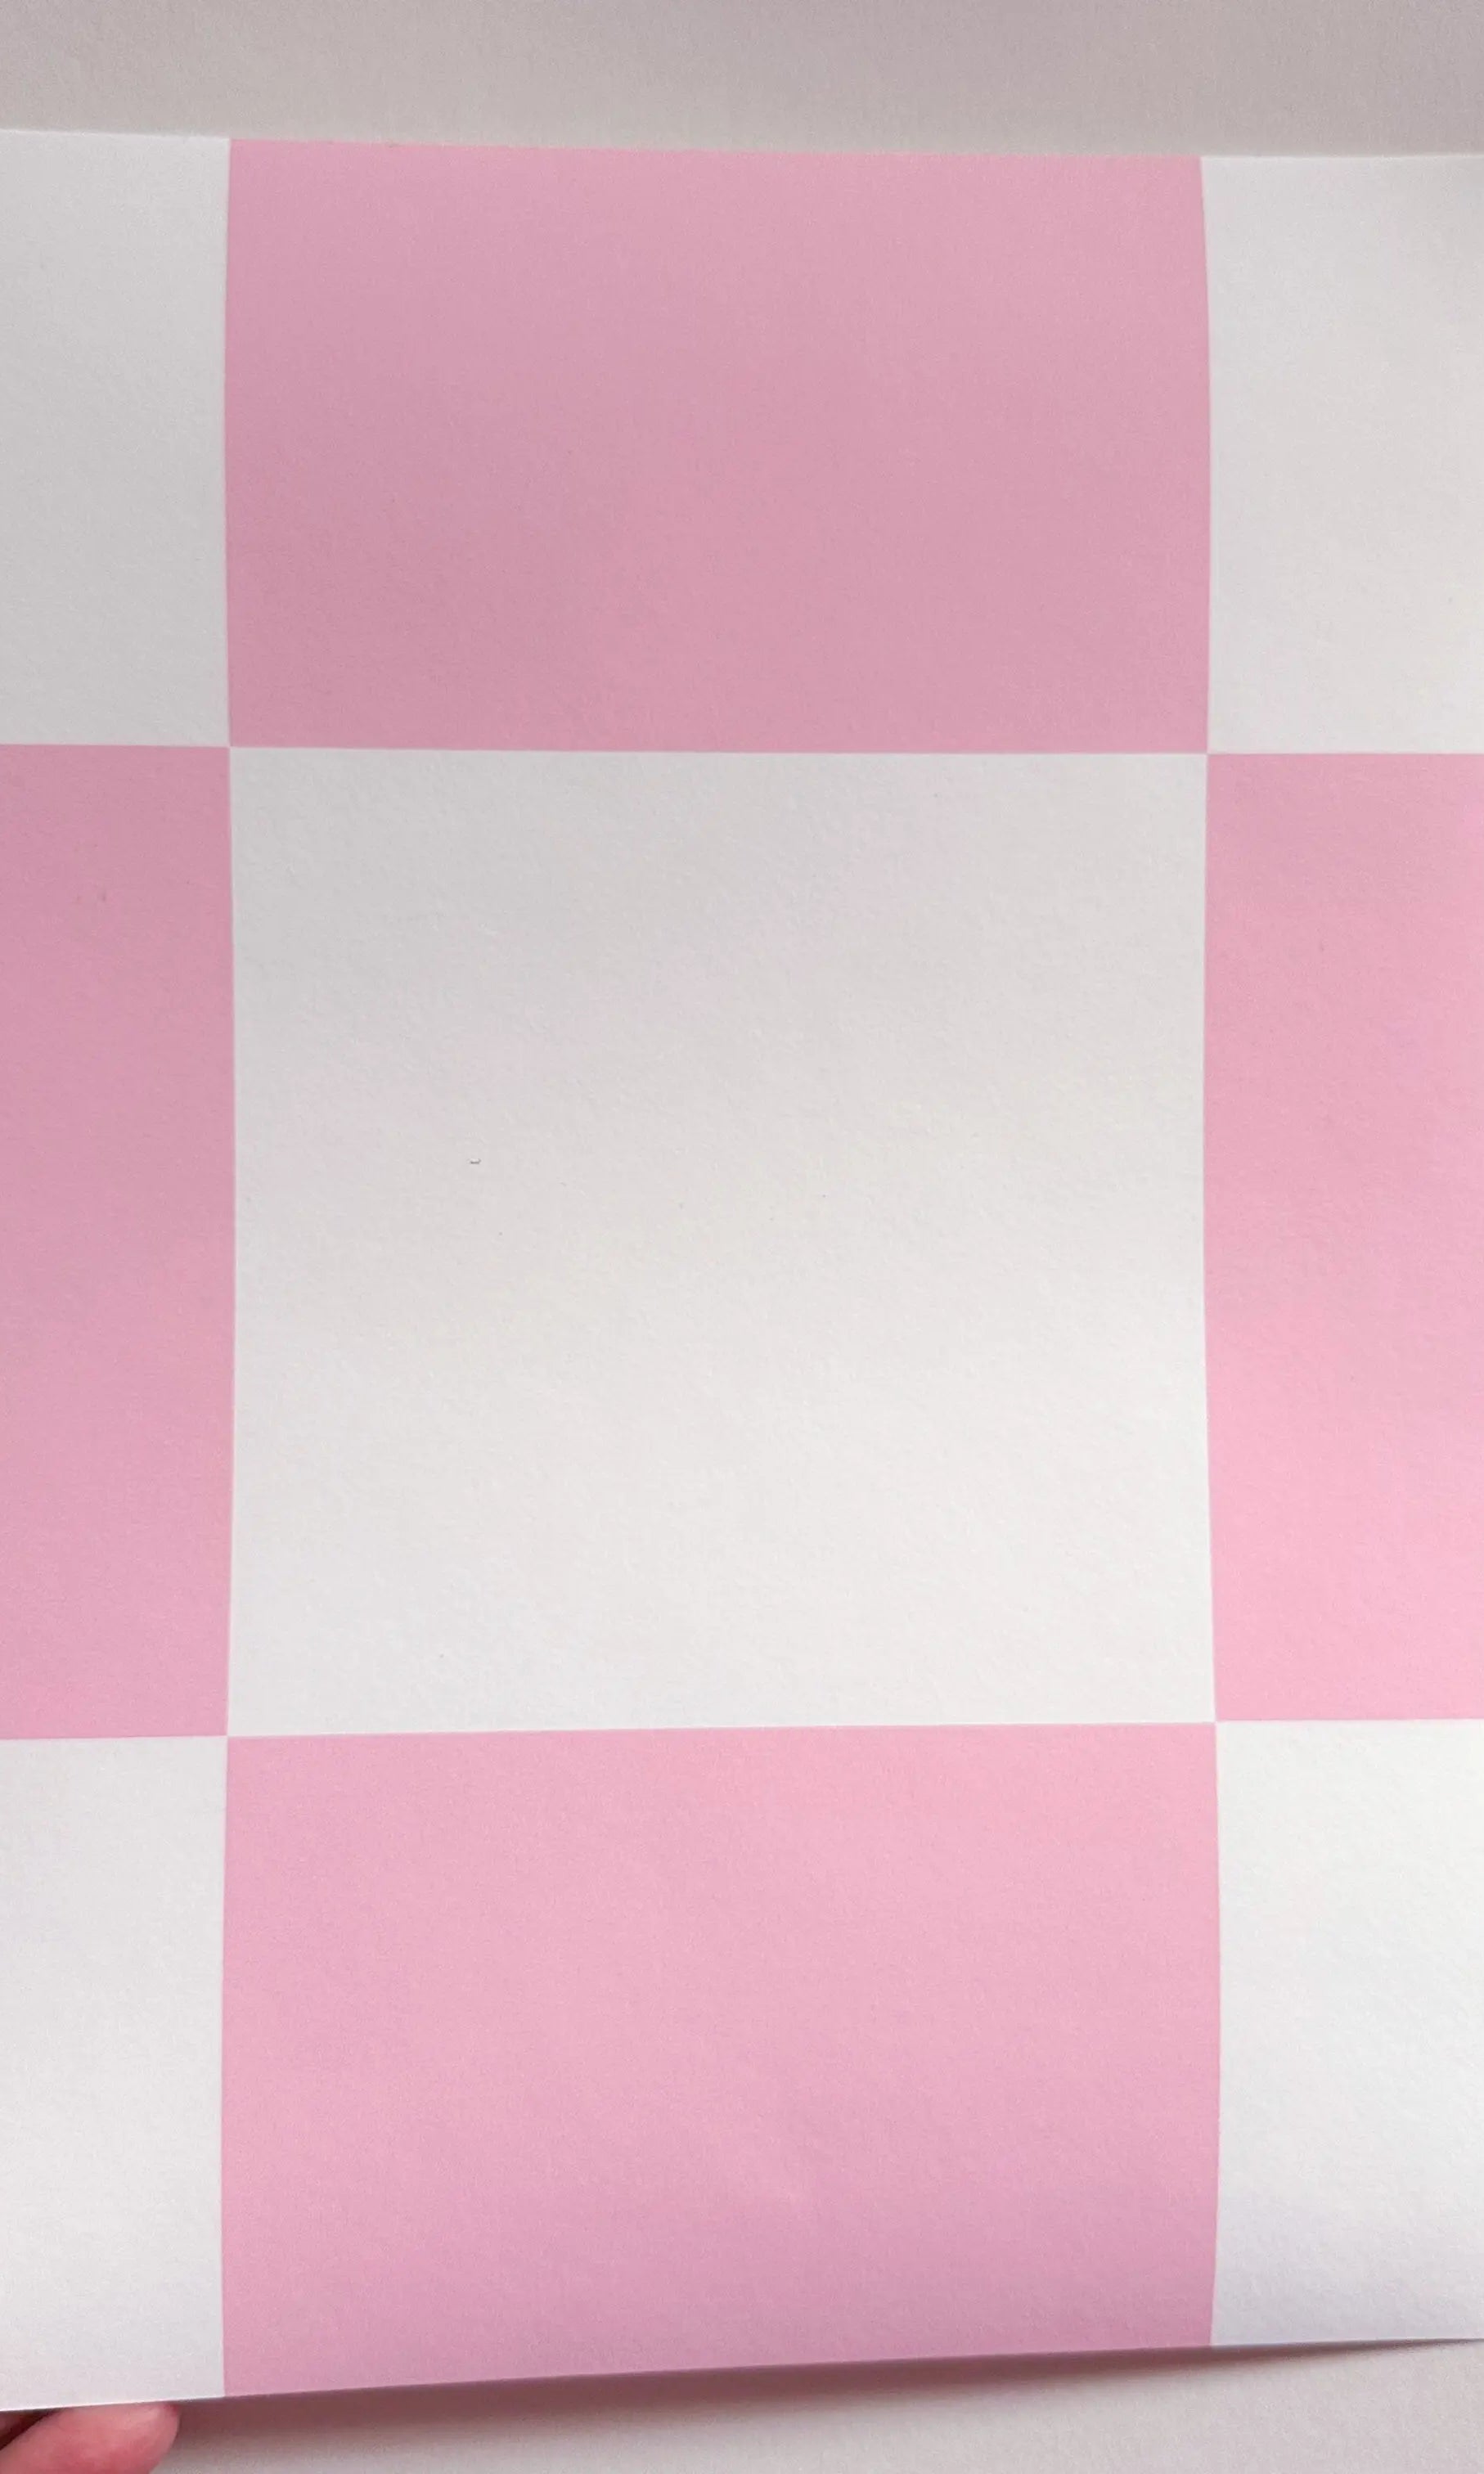 ‘Checkmate’ Checkered Wallpaper in Pink Candy Sorbet Dreams